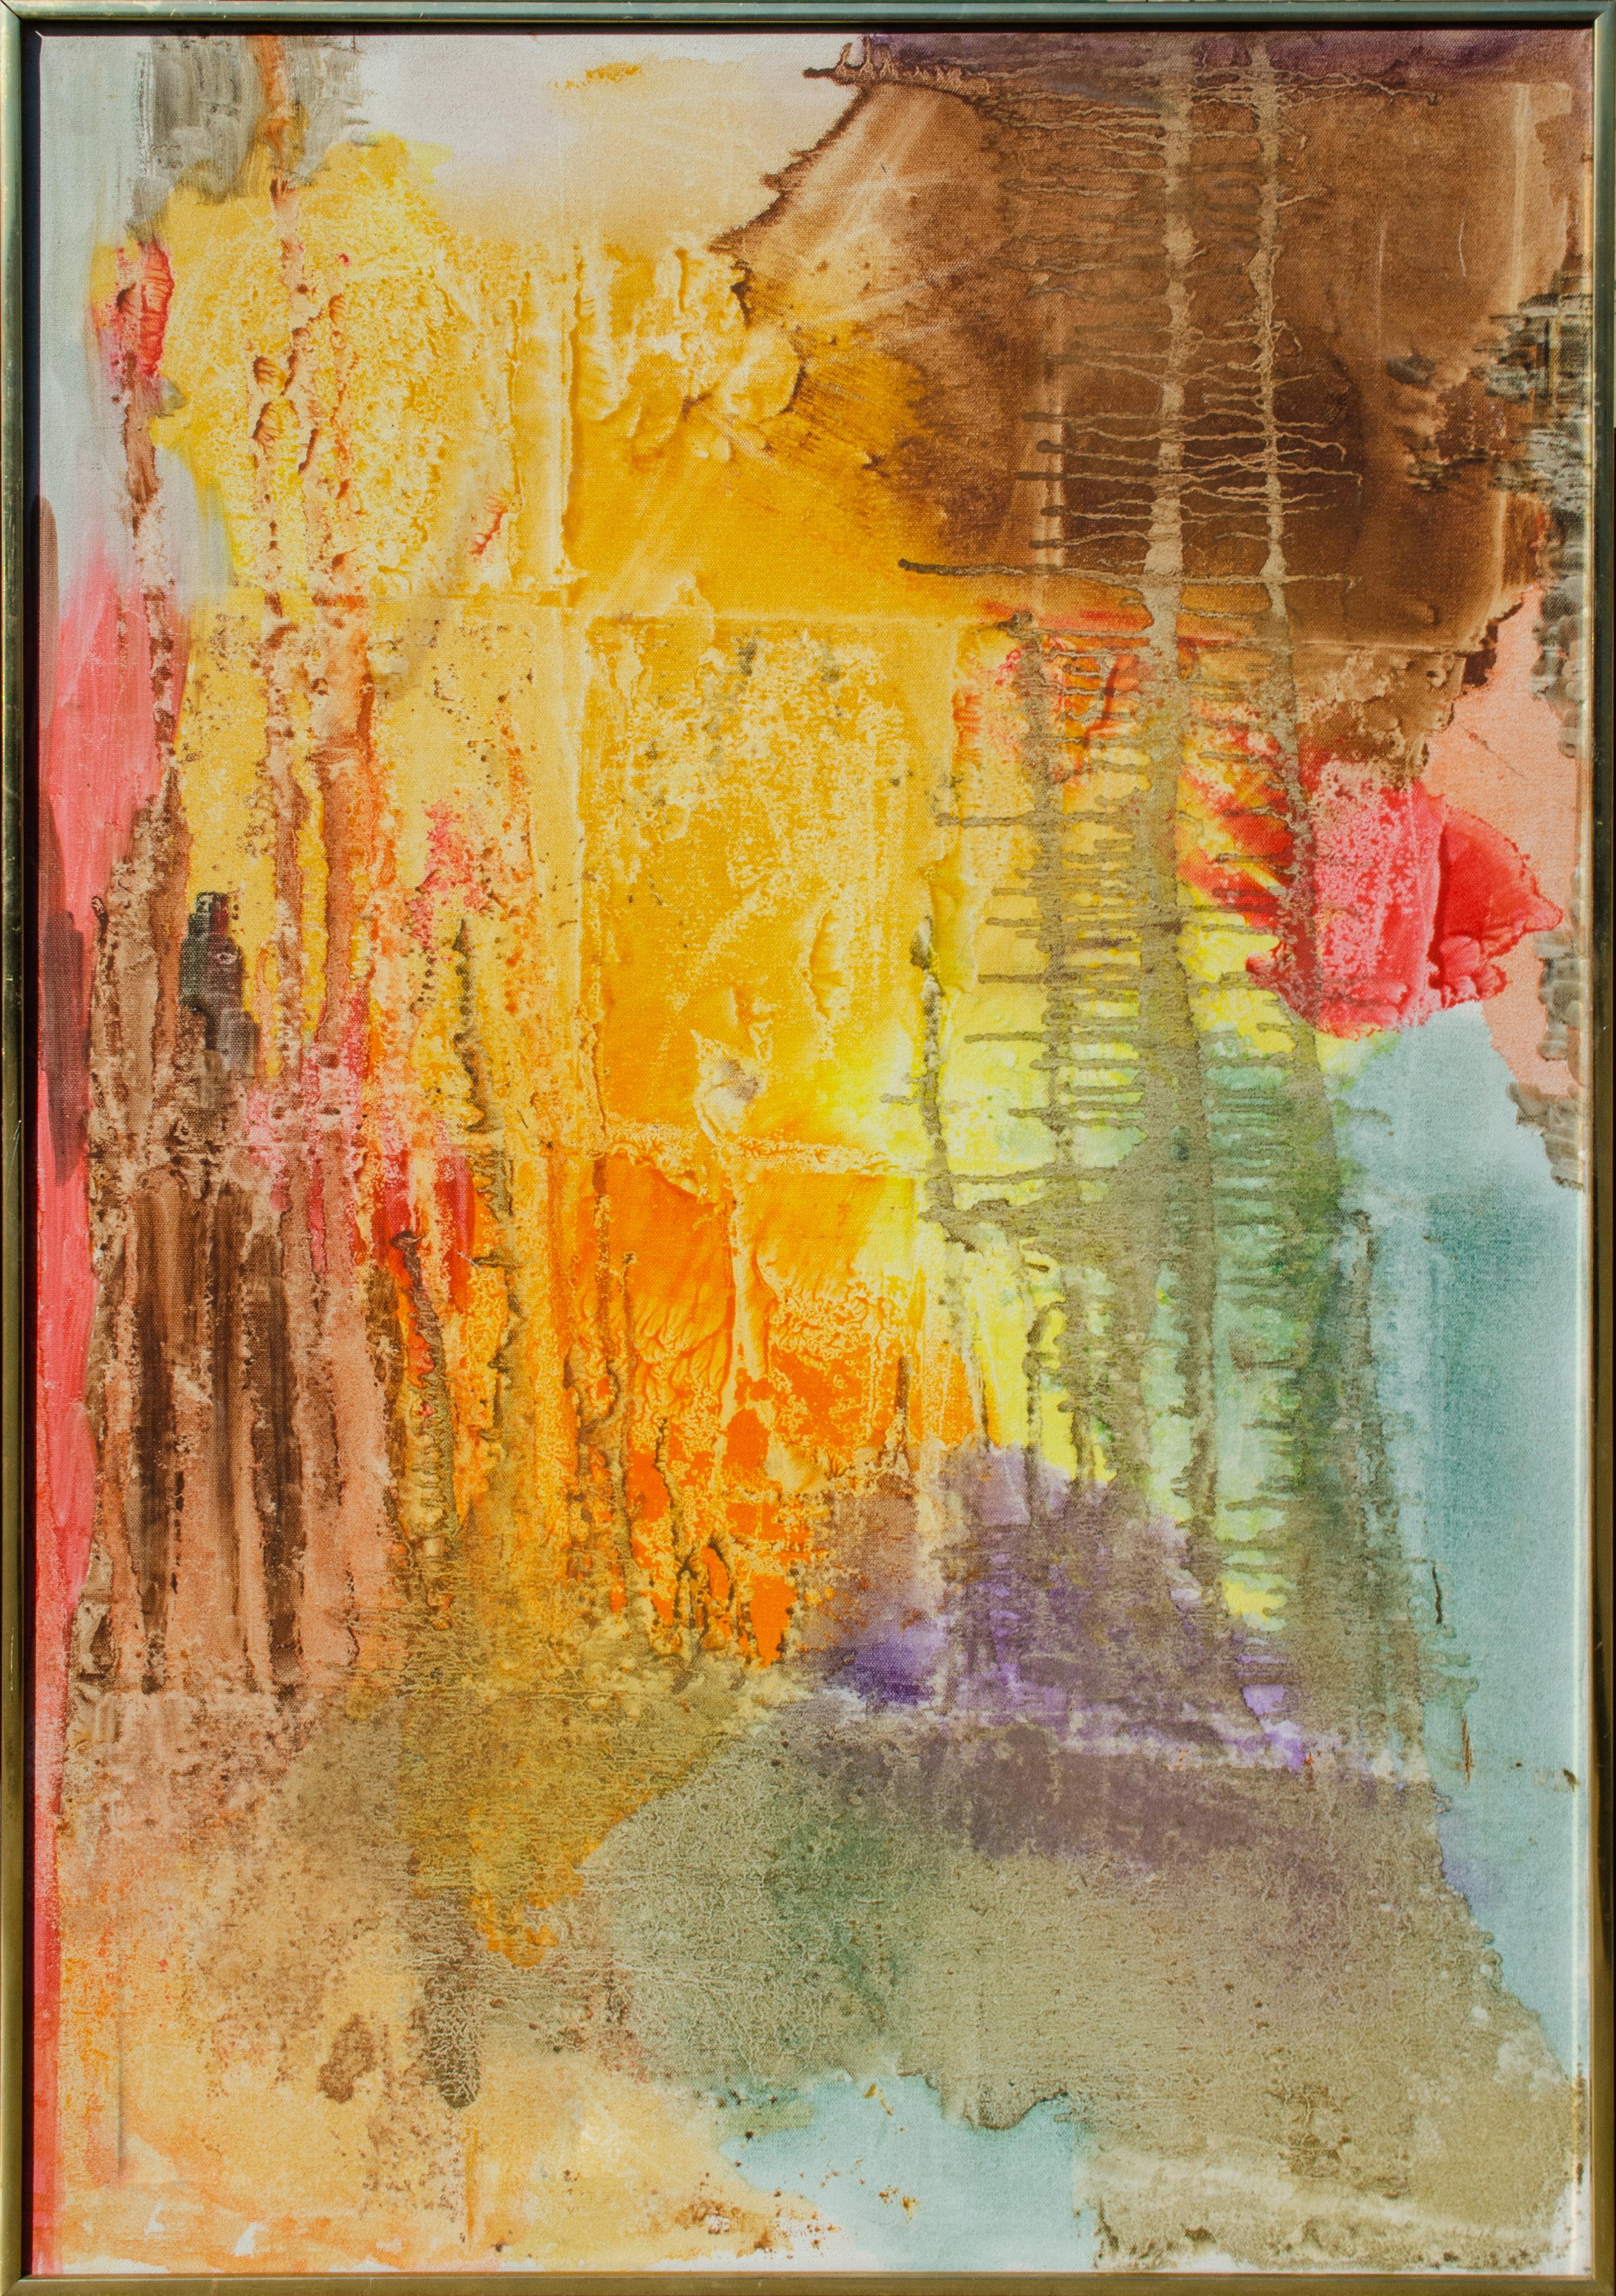 Unknown Abstract Painting - Colorful 1970s Abstraction, Signed "Soyer" Illegibly